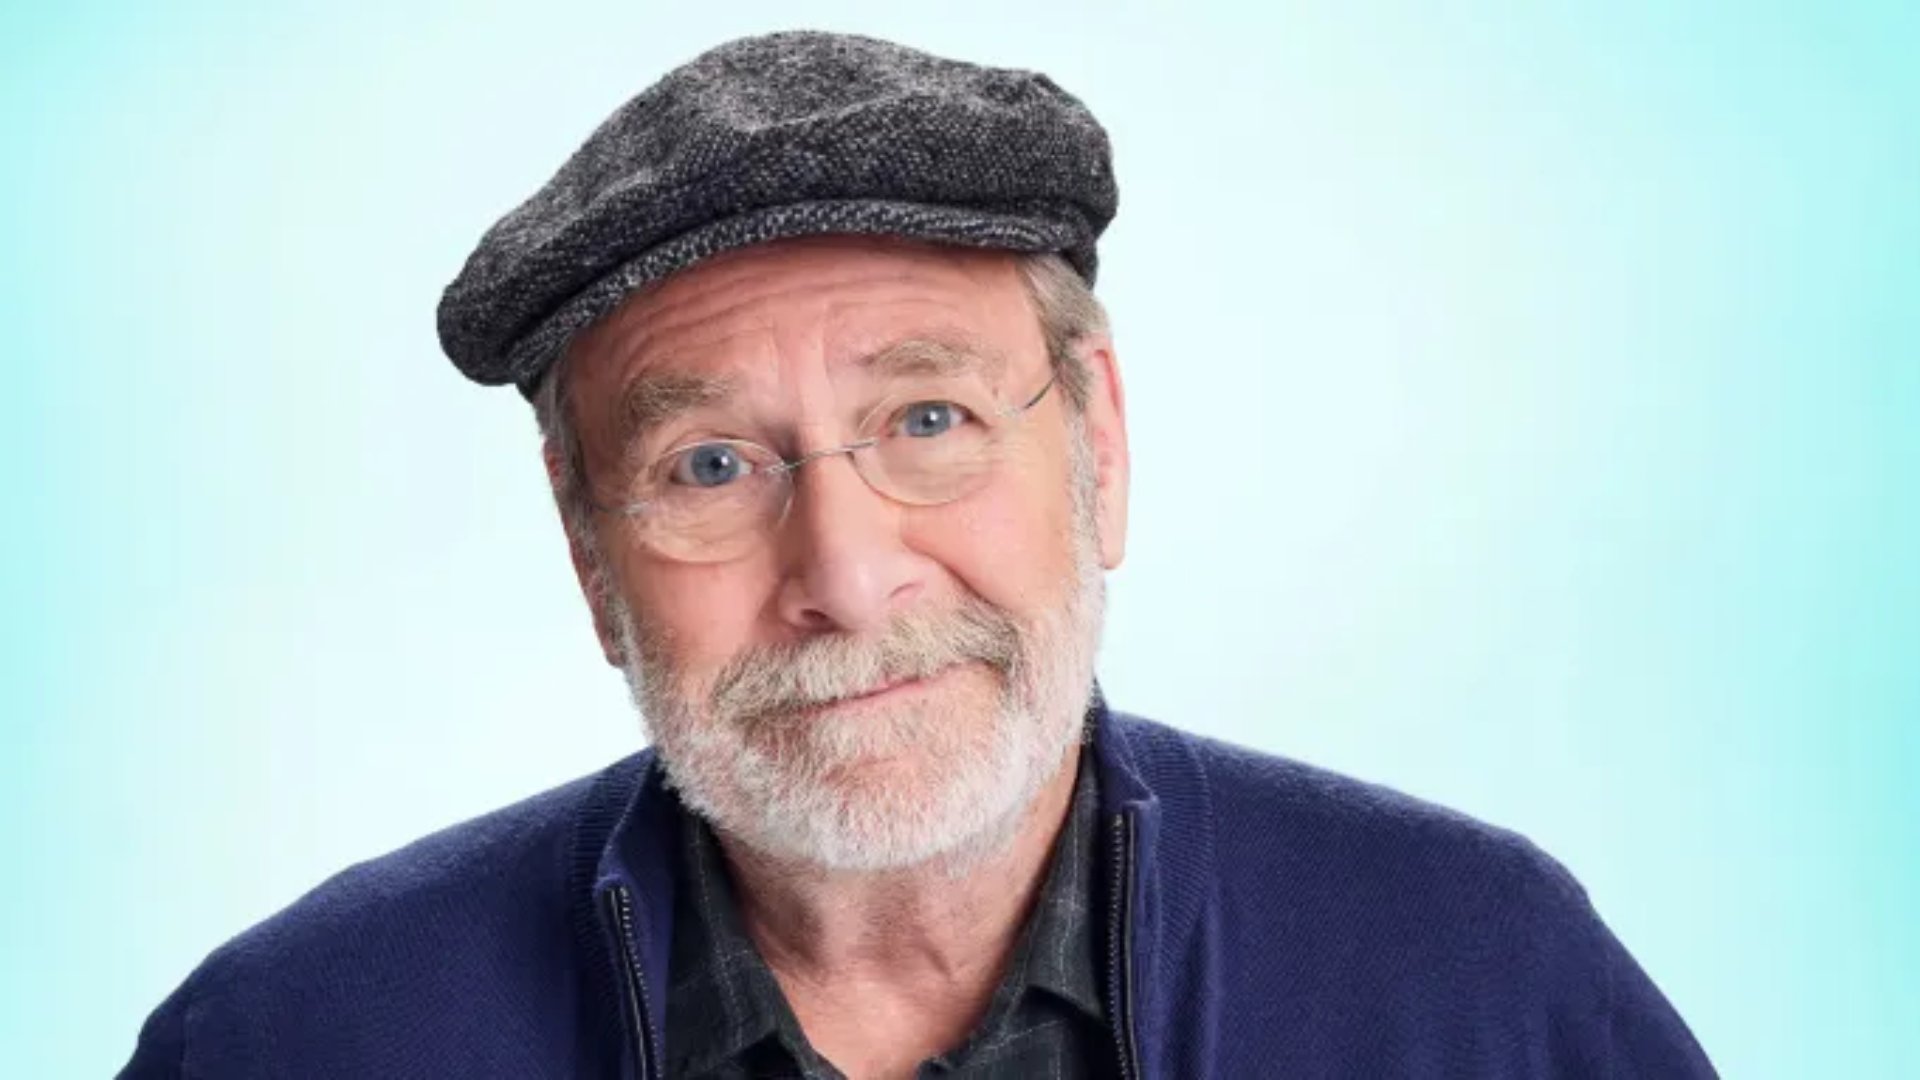 Martin Mull is notable for his performance in Mary Hartman and its spinoffs